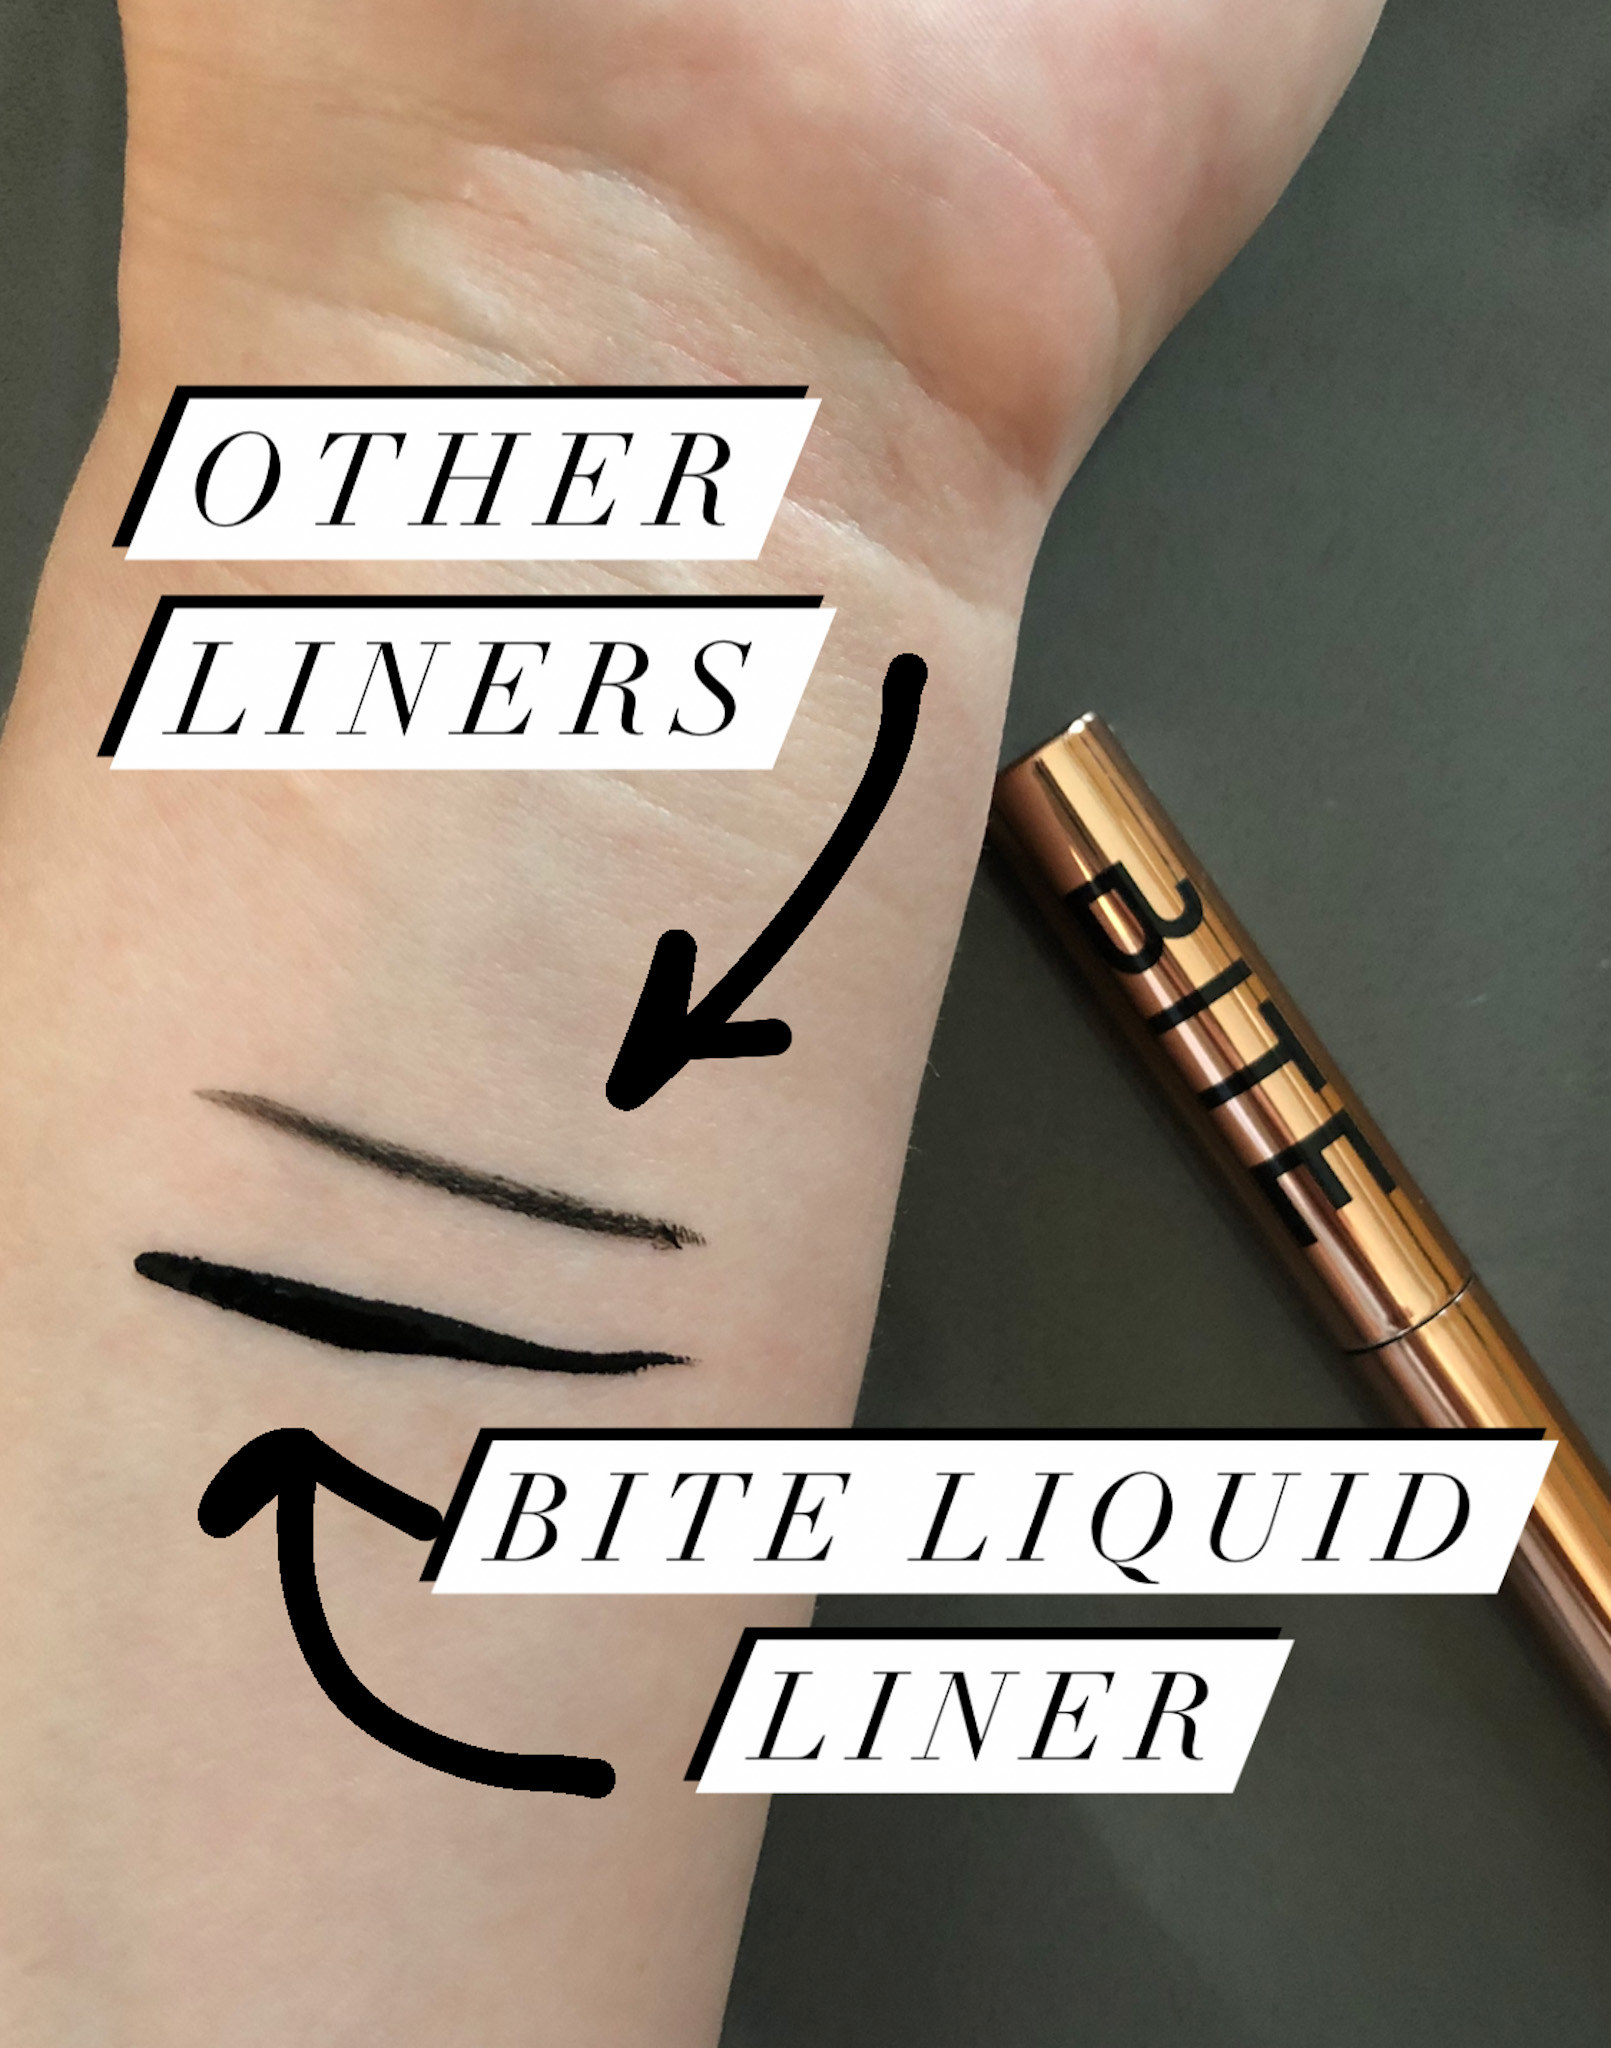 A swatch of the bite liquid liner compared to another liquid liner; the bite one is crisp and highly pigmented